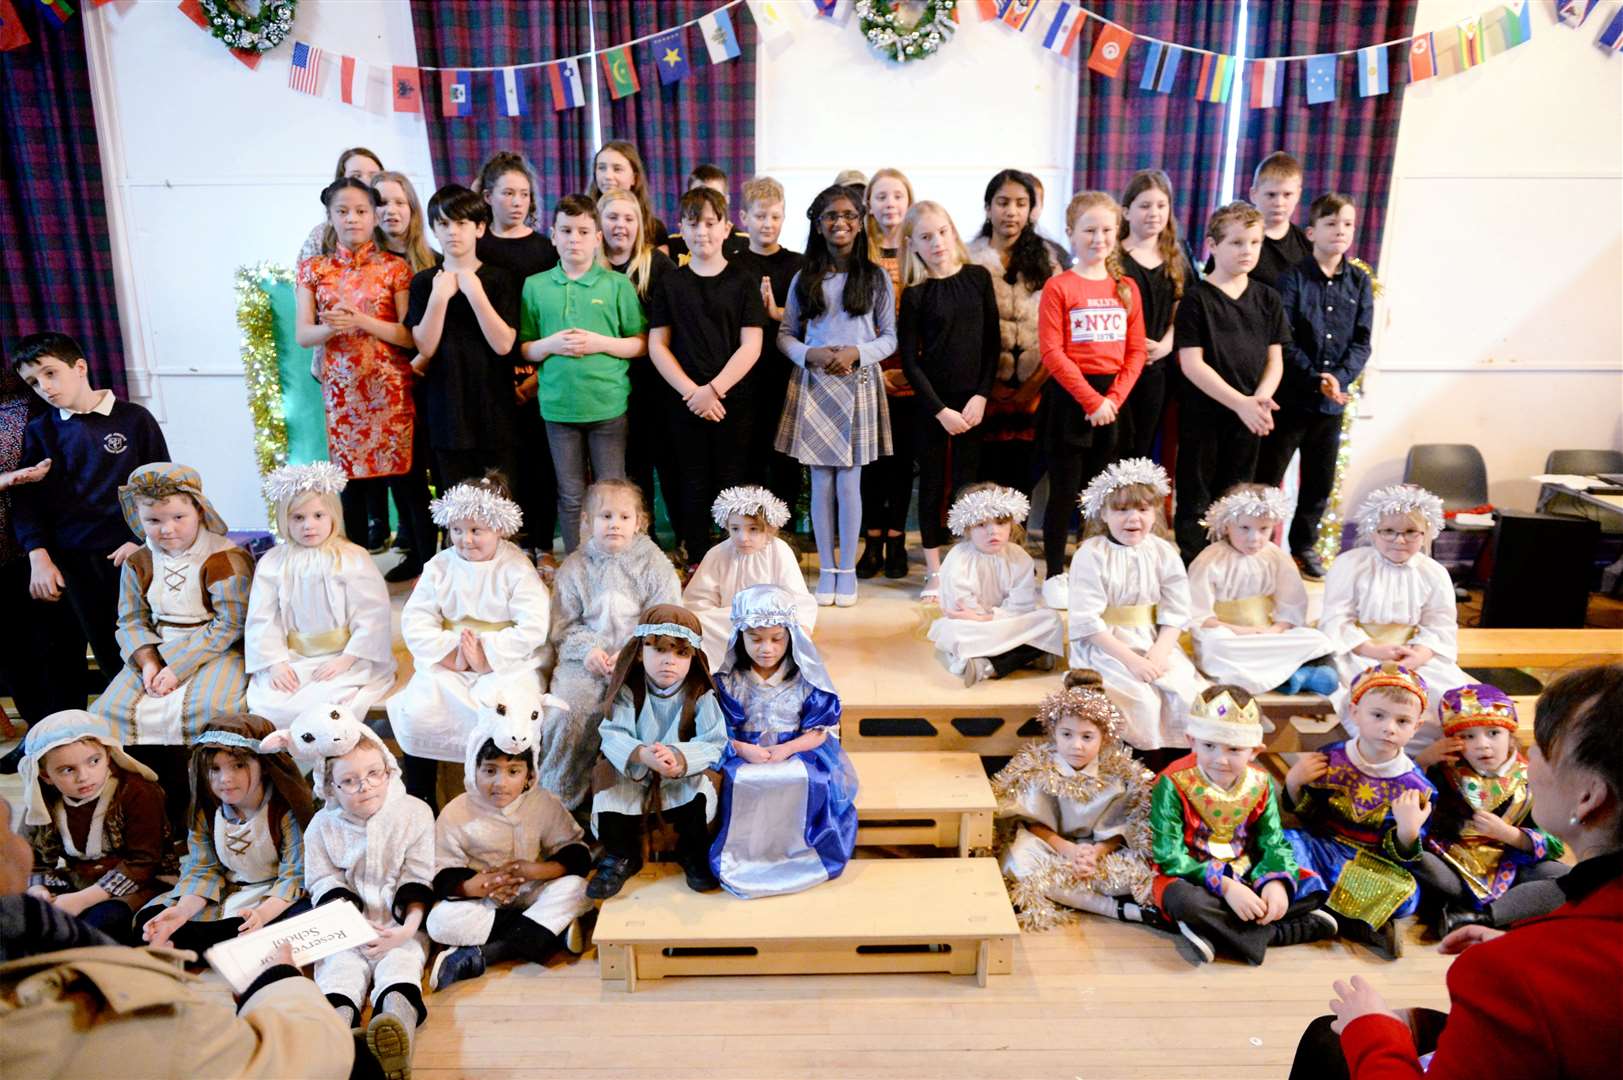 St Joseph's RC Primary School Nativity 2019. The P7s and P1s up on stage. Picture: James MacKenzie.